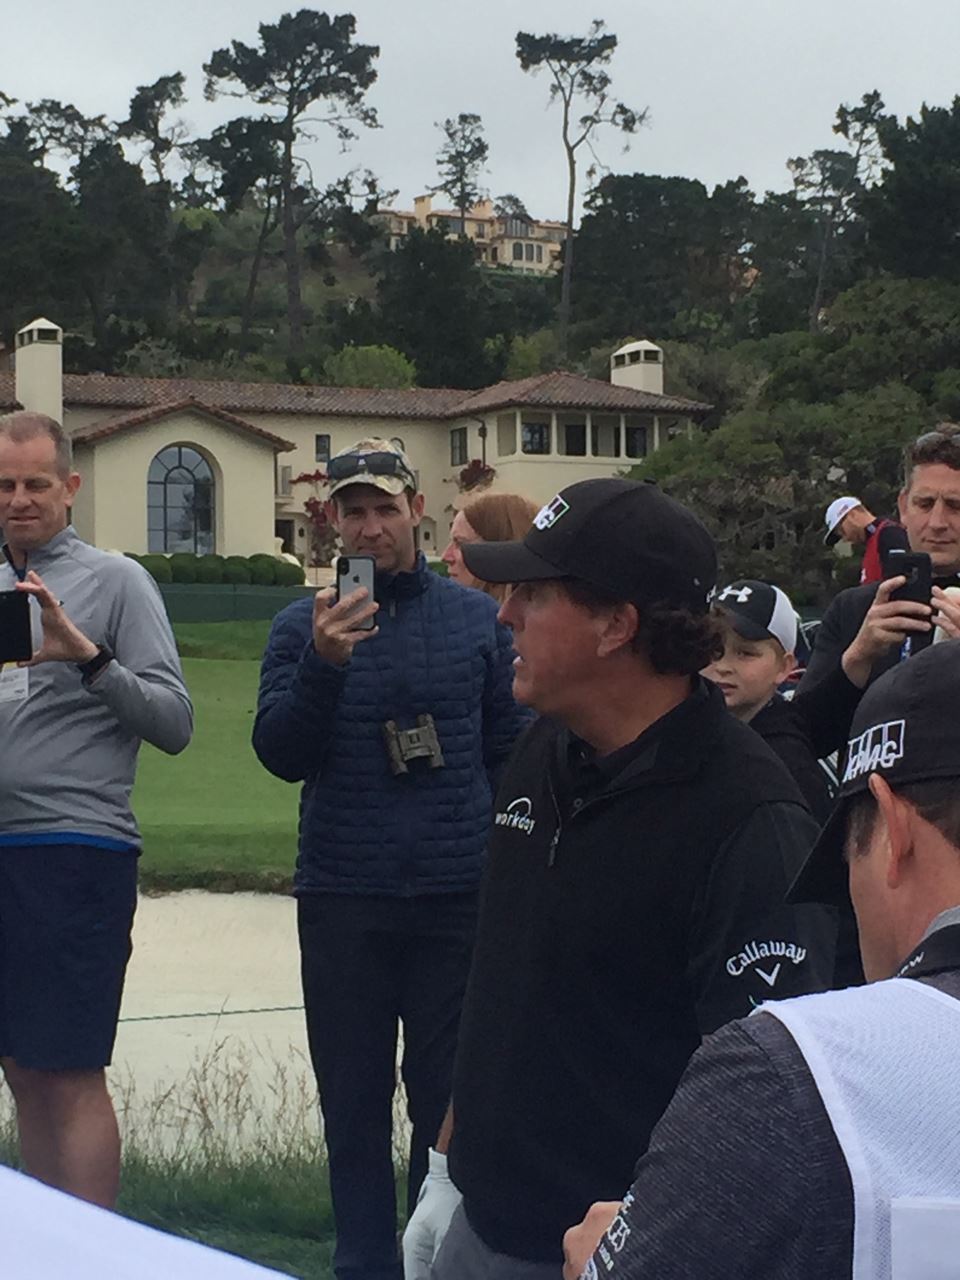 Phil Mickelson among the fans